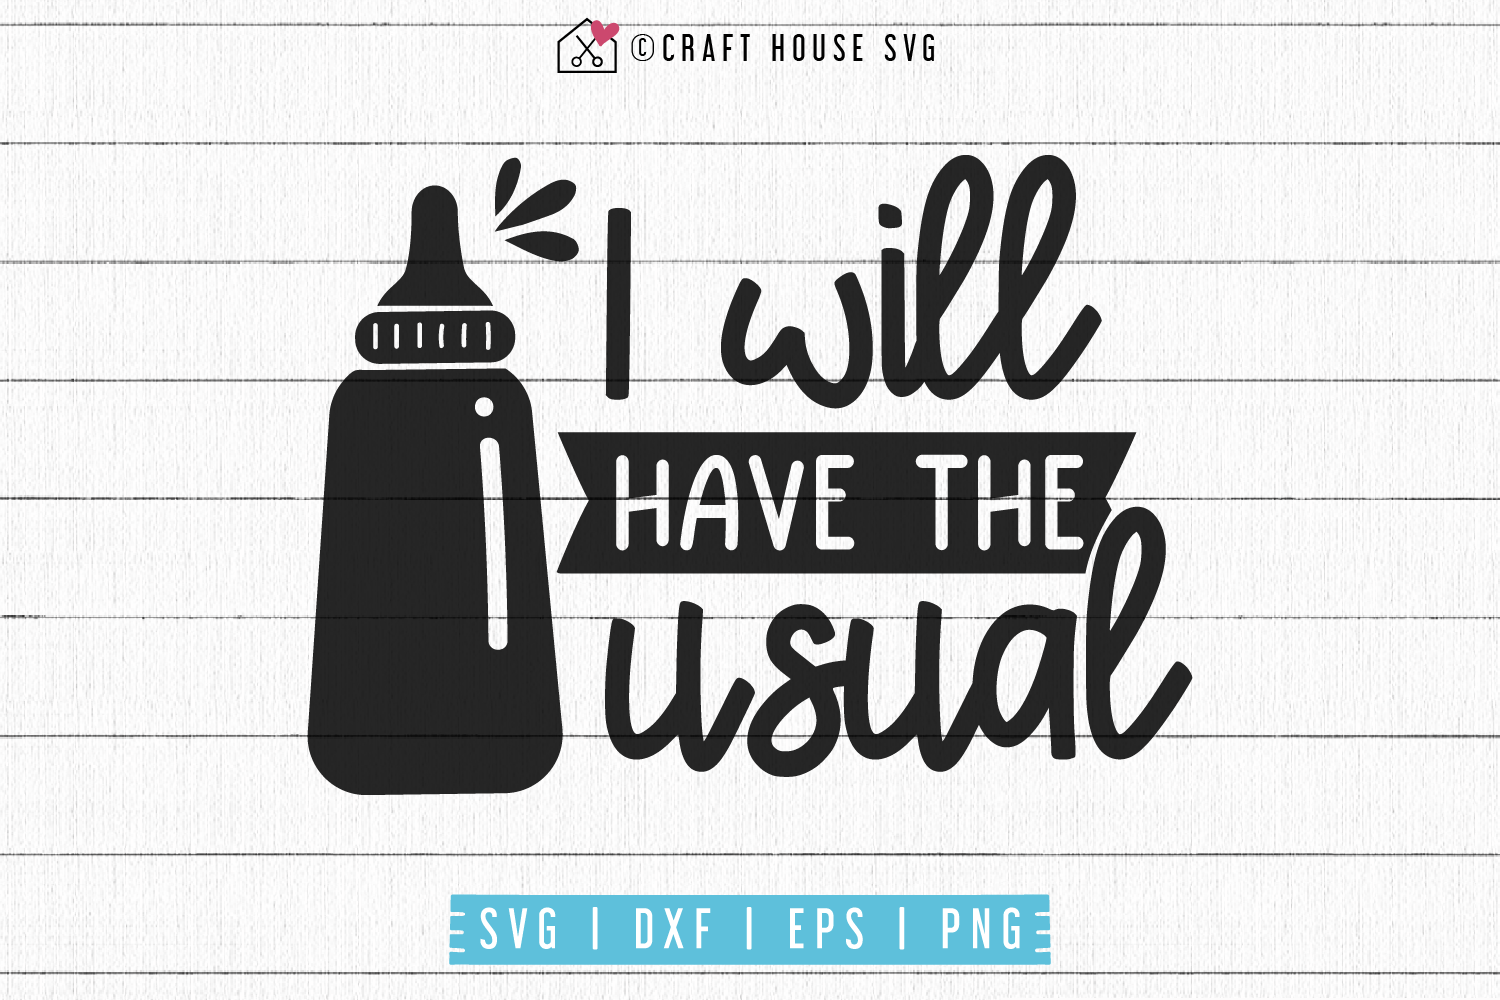 I will have the usual SVG | M53F Craft House SVG - SVG files for Cricut and Silhouette